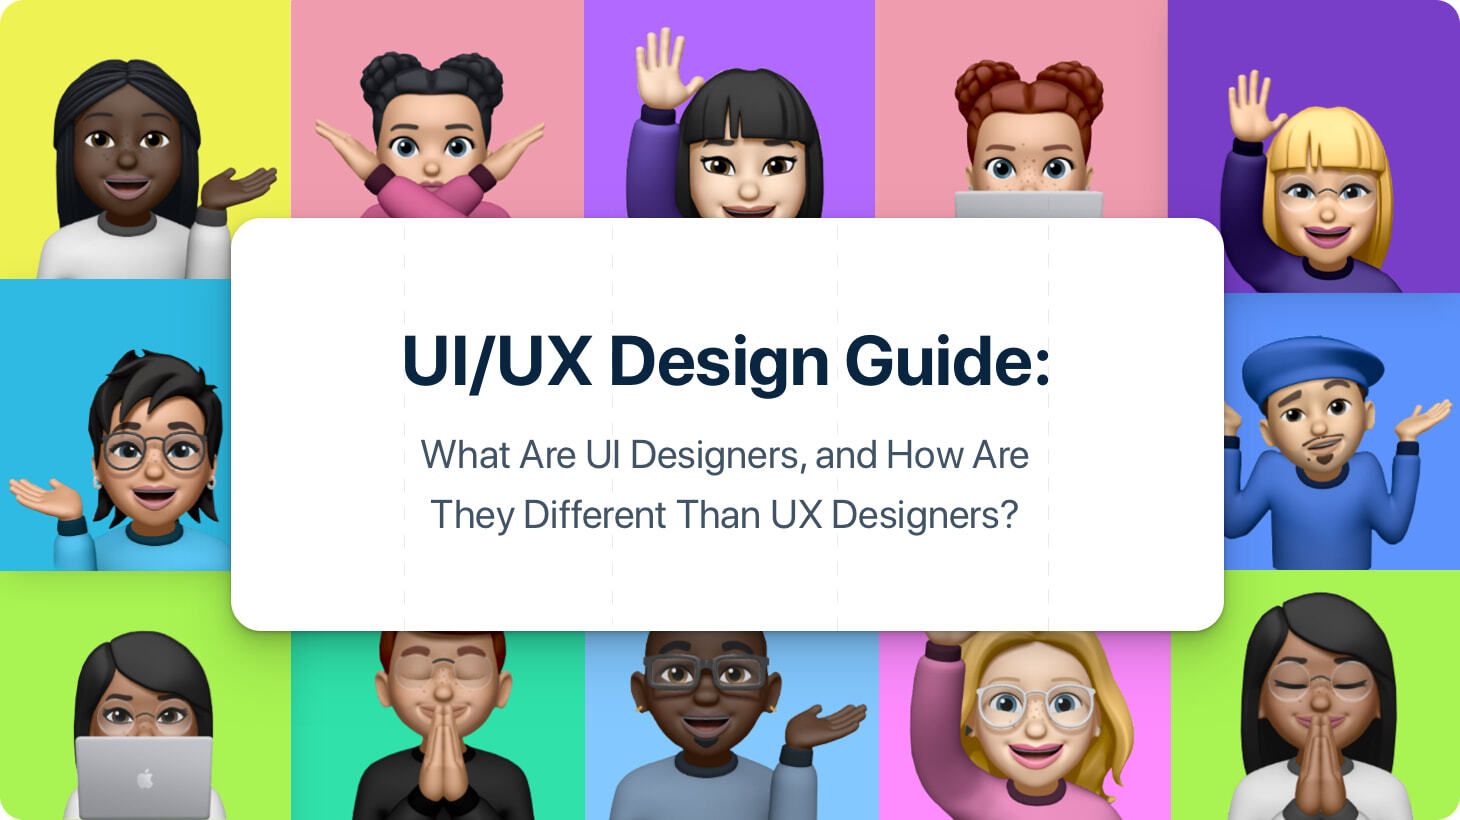 Creating Seamless User Experiences: Best Practices for UI/UX Design